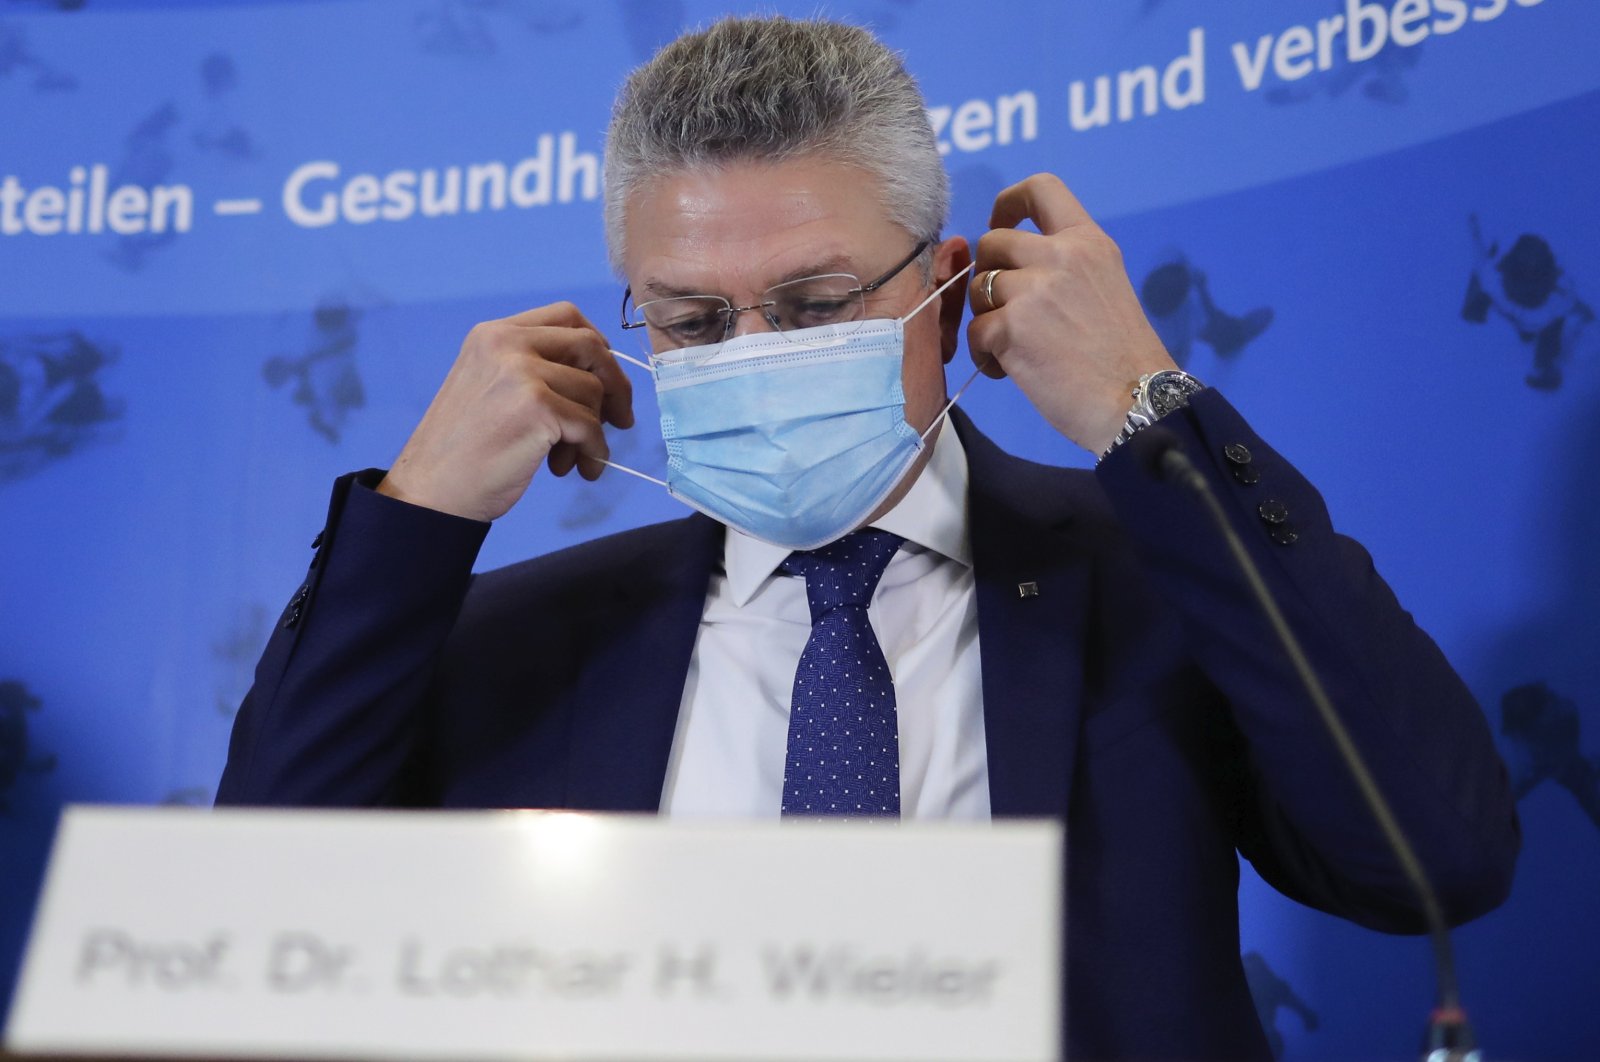 The head of the Robert Koch Institute, Germany's federal government agency and research institute responsible for disease control and prevention, Lothar Wieler, arrives for a news conference on the coronavirus and the COVID-19 disease in Berlin, Thursday, Oct. 22, 2020. (AP Photo)